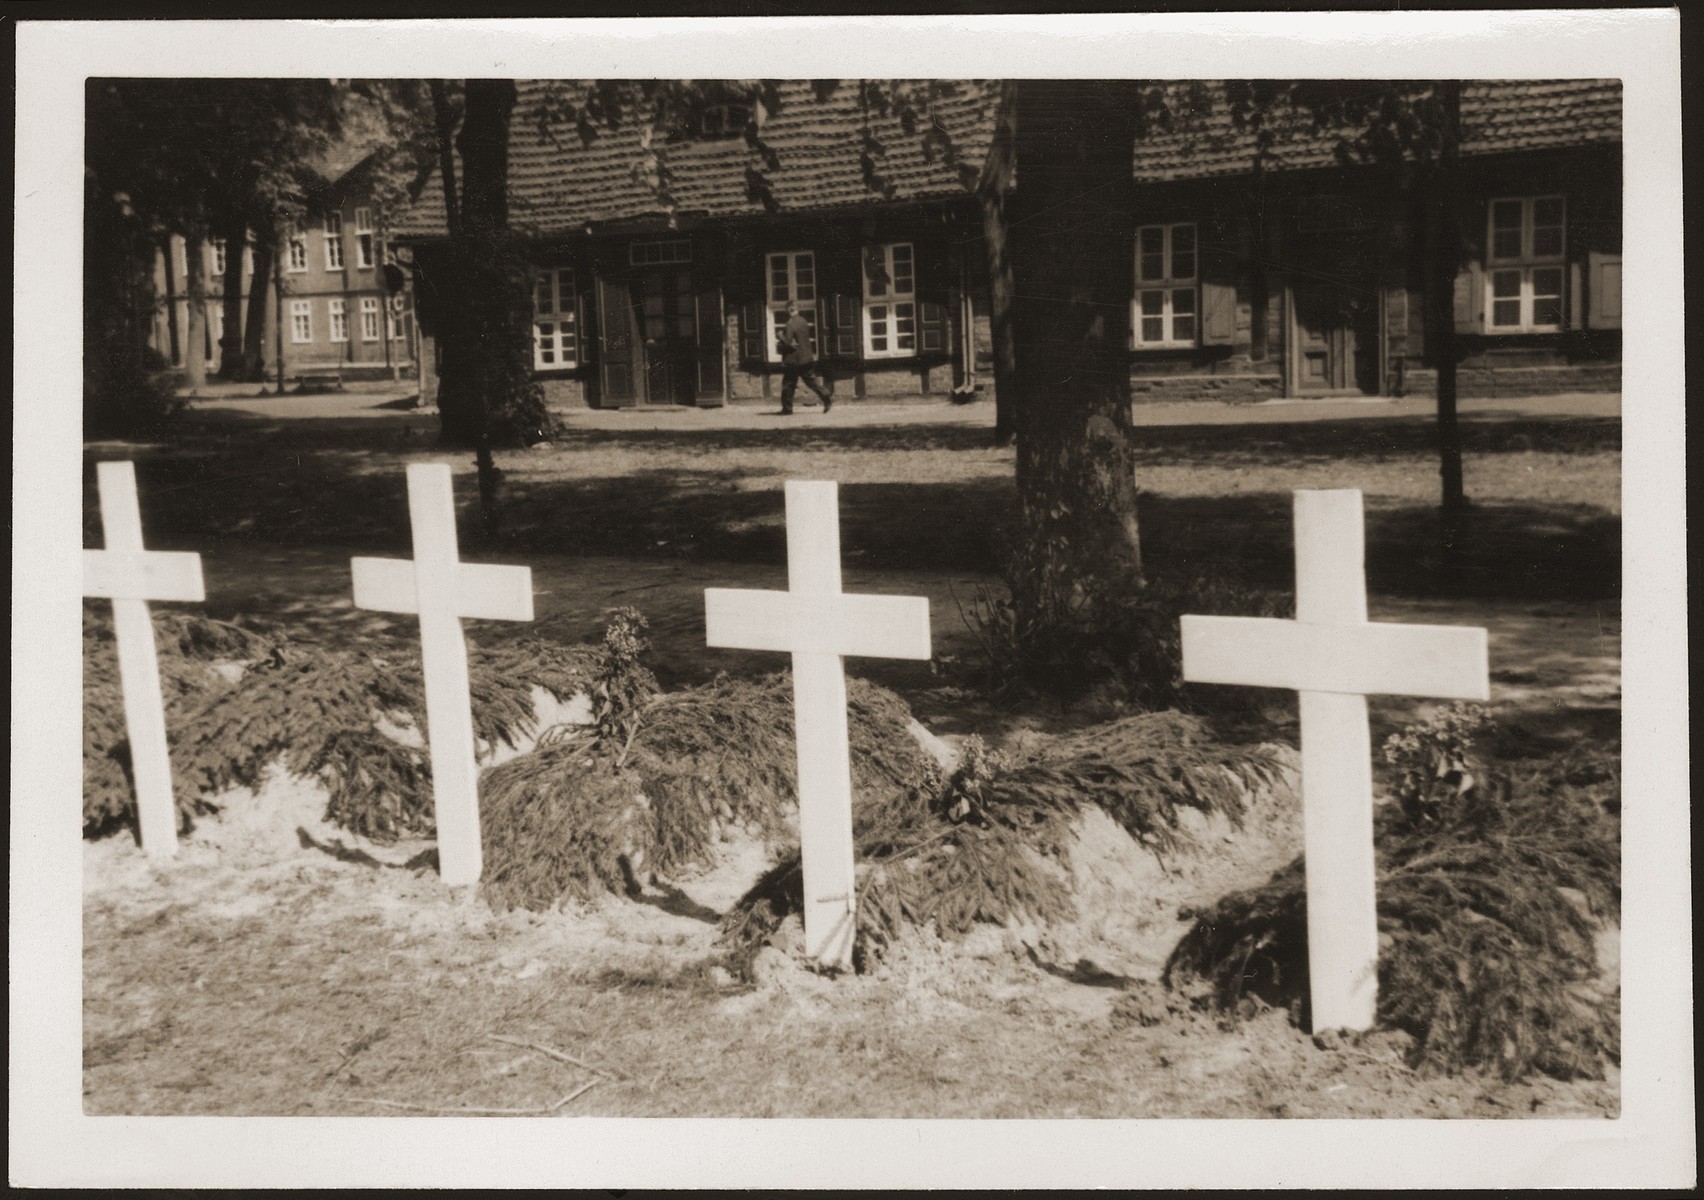 Graves dug by the people of Ludwigslust on the palace grounds of the Archduke of Mecklenburg, where they have been forced by U.S. troops to bury the bodies of prisoners killed in the Woebbelin concentration camp.